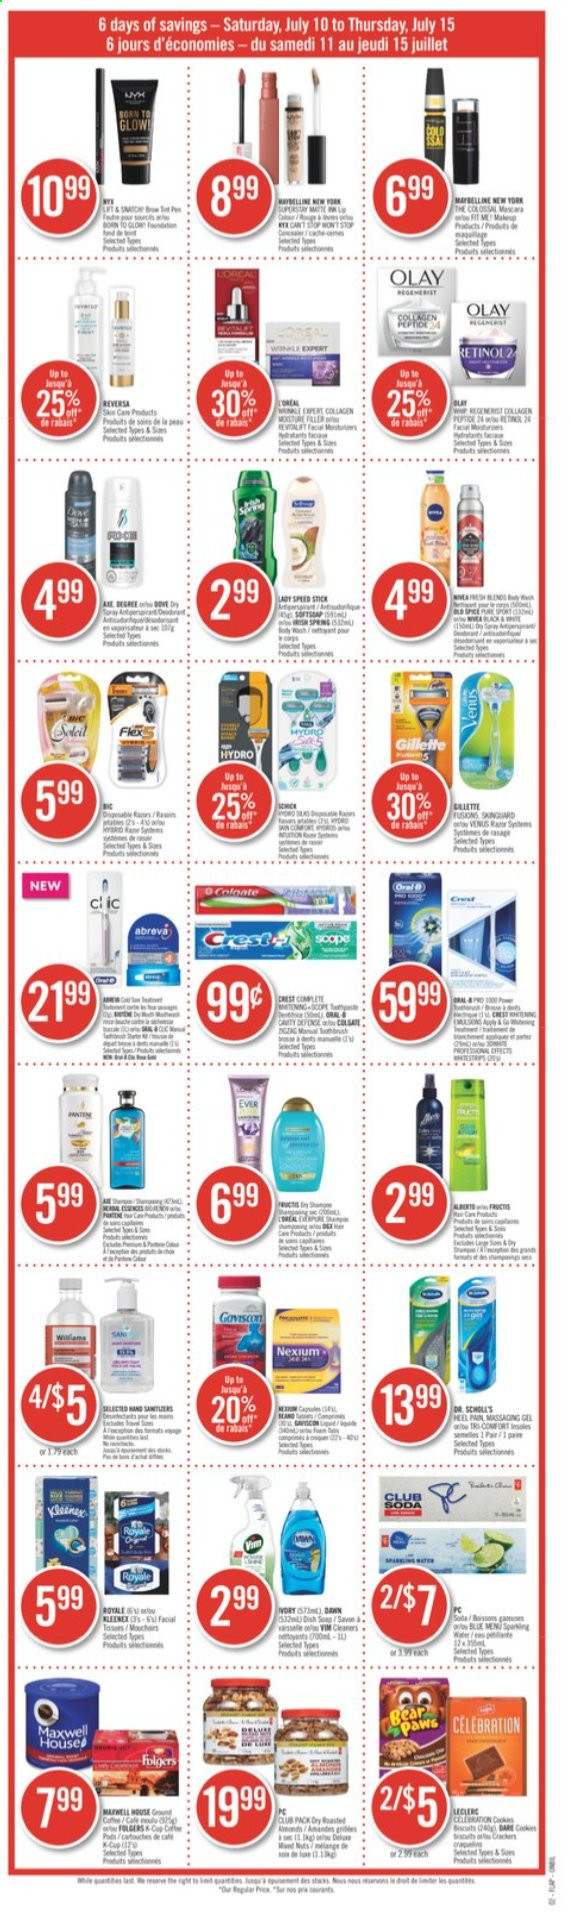 thumbnail - Shoppers Drug Mart Flyer - July 10, 2021 - July 15, 2021 - Sales products - Celebration, crackers, Club Soda, Maxwell House, Kleenex, soap, Crest, Abreva, Olay, Speed Stick, Venus, Nexium, Gillette, Maybelline. Page 16.